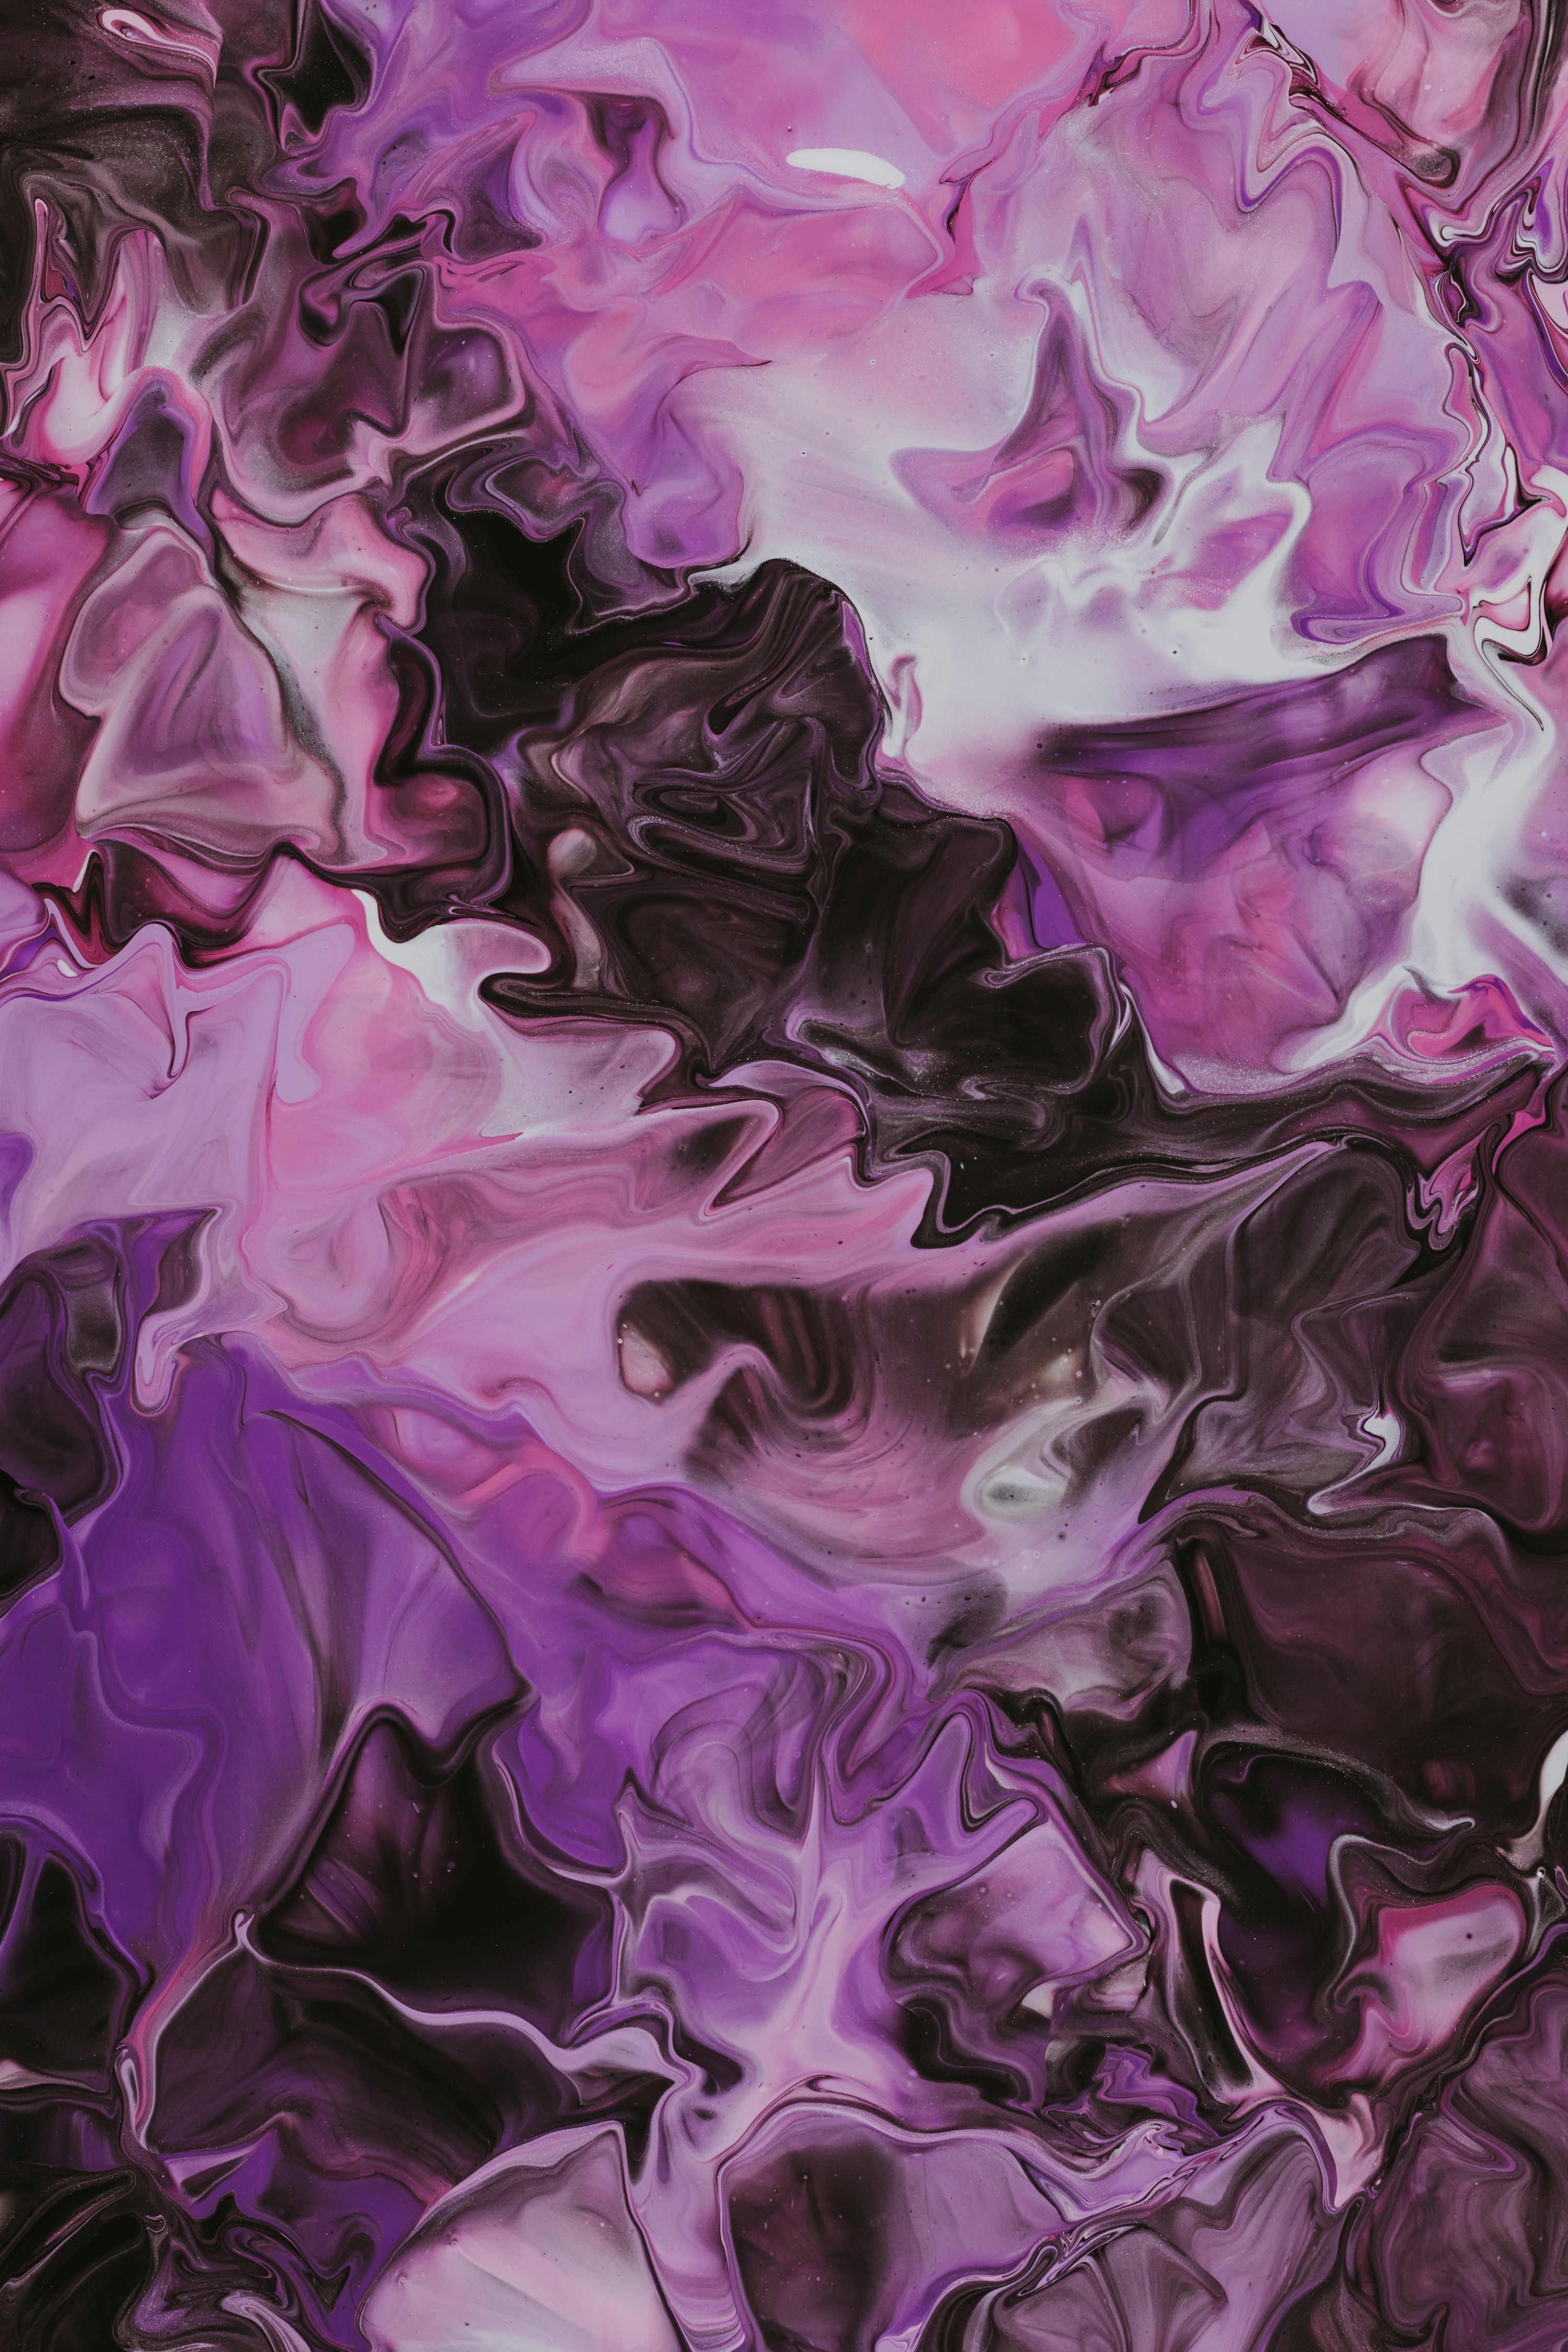 69861 download wallpaper abstract, violet, macro, divorces, paint, purple screensavers and pictures for free